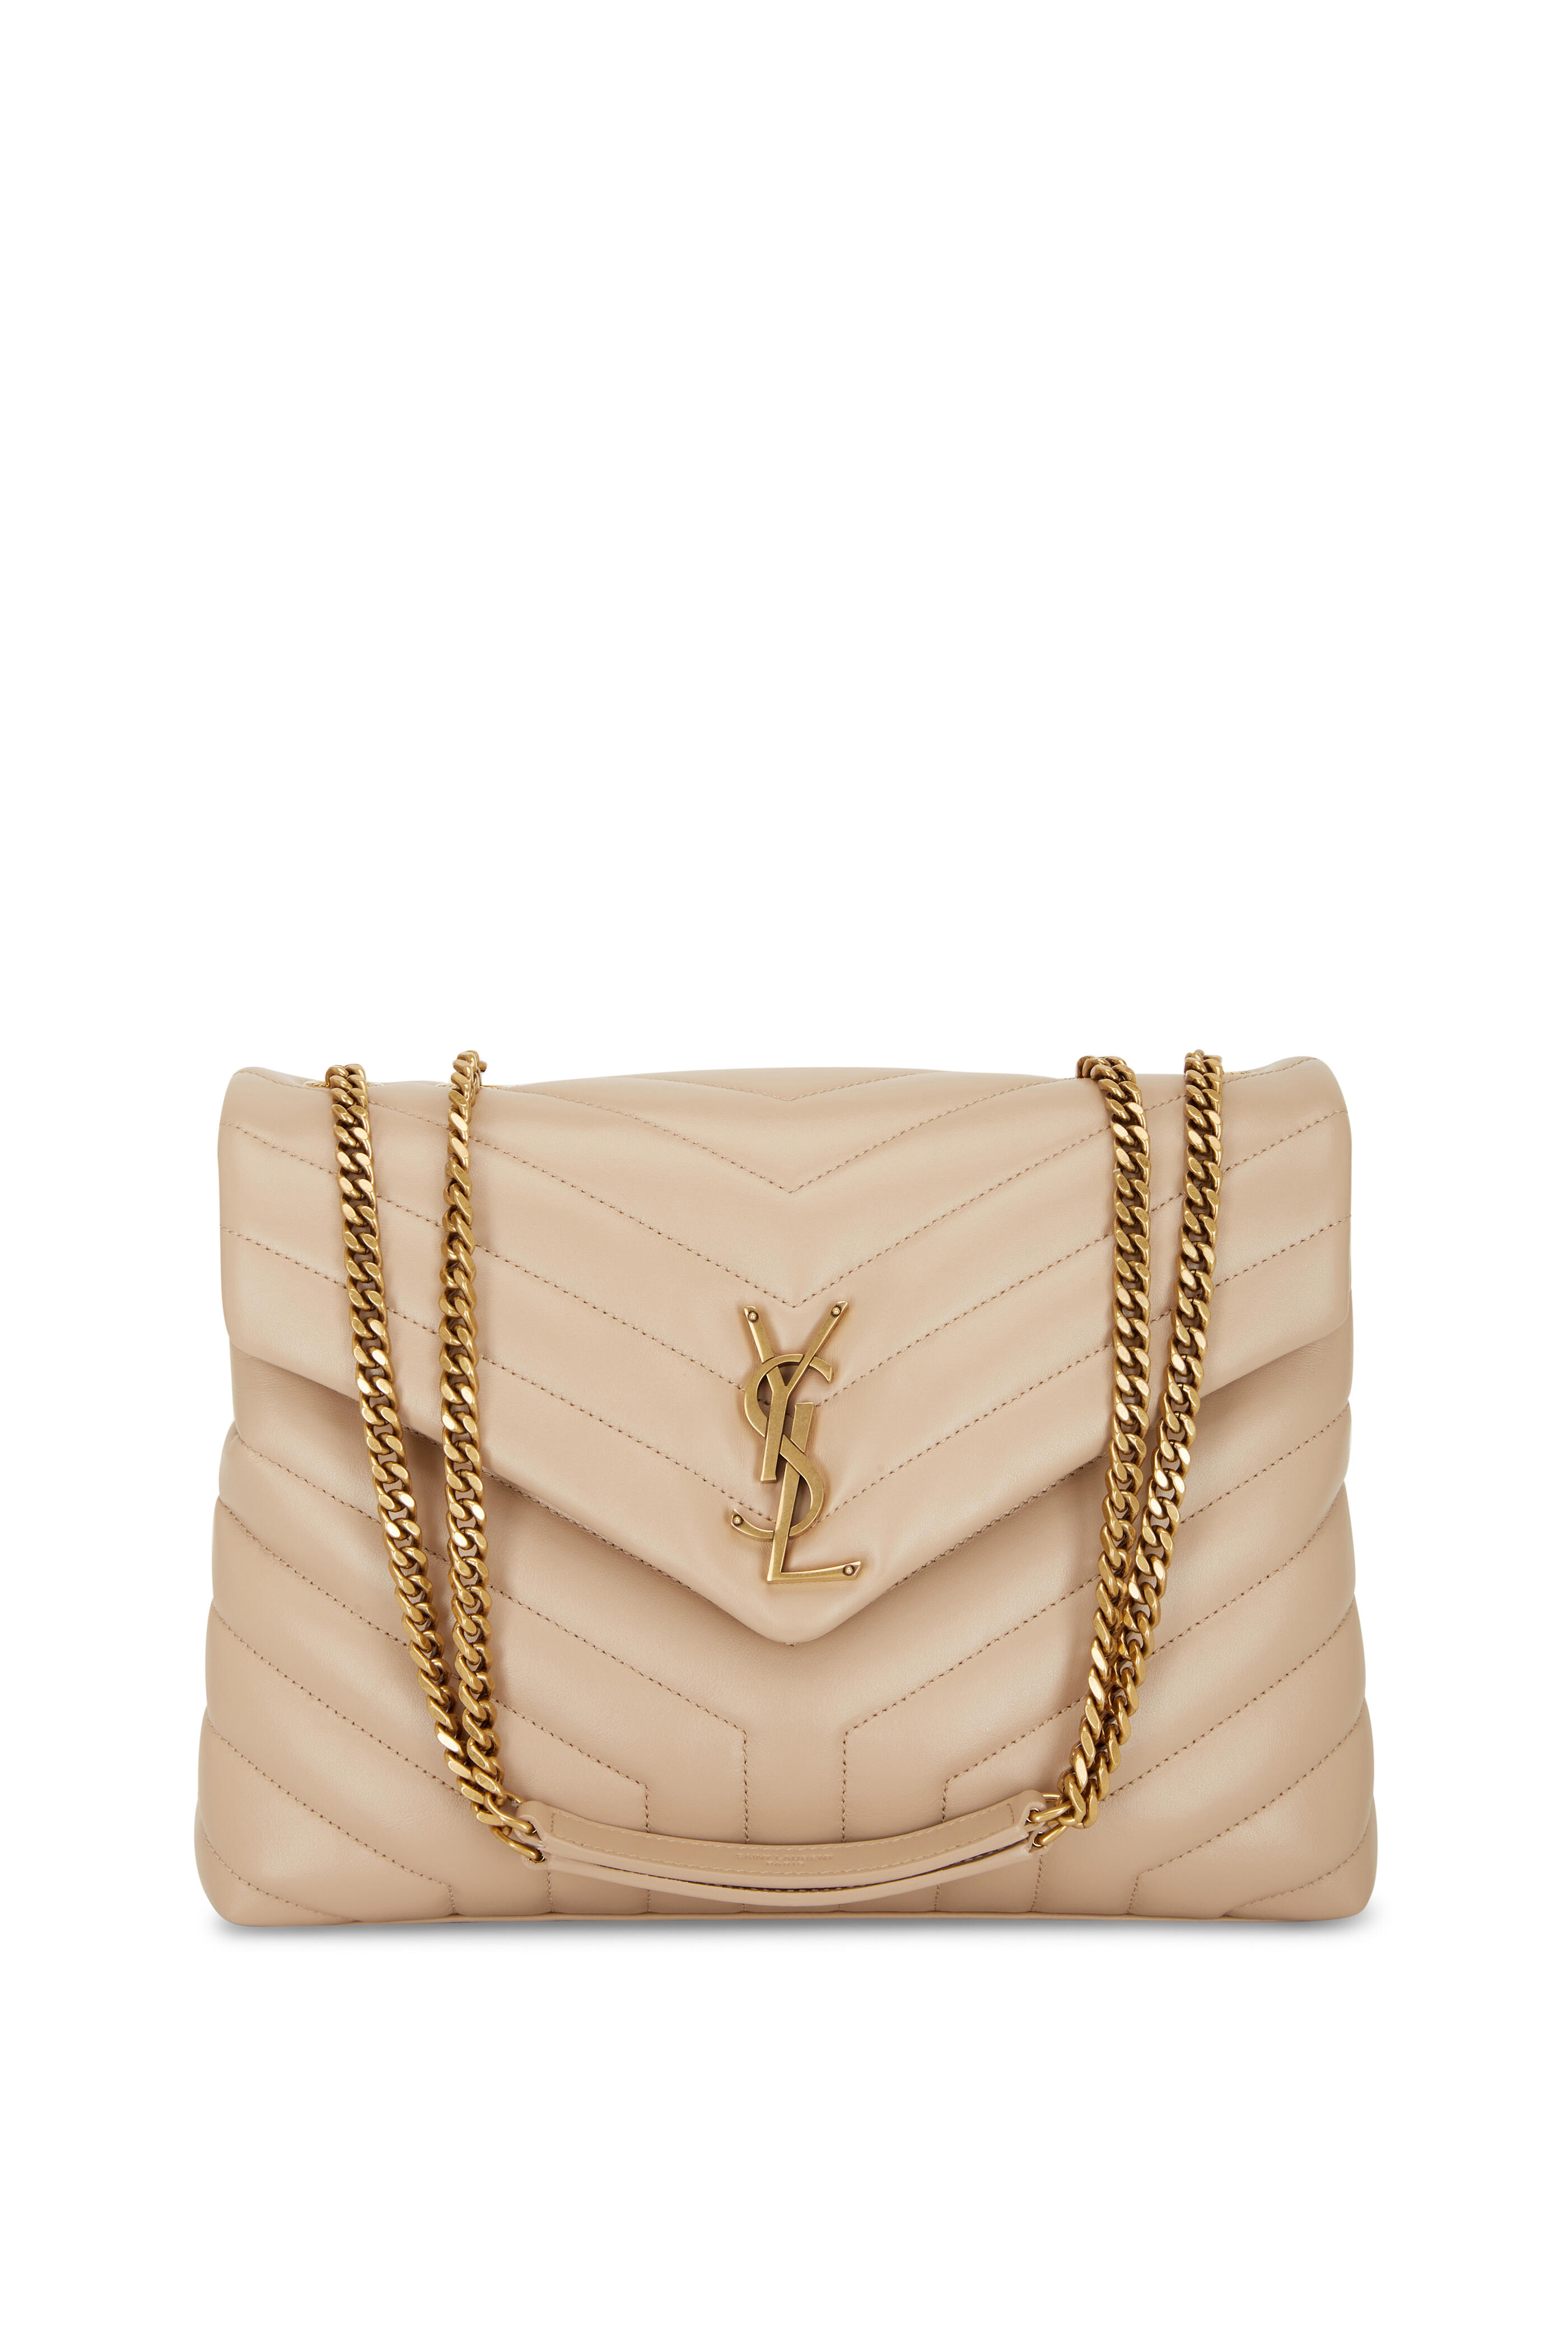 Cream Leather-Look Quilted Chain Strap Shoulder Bag